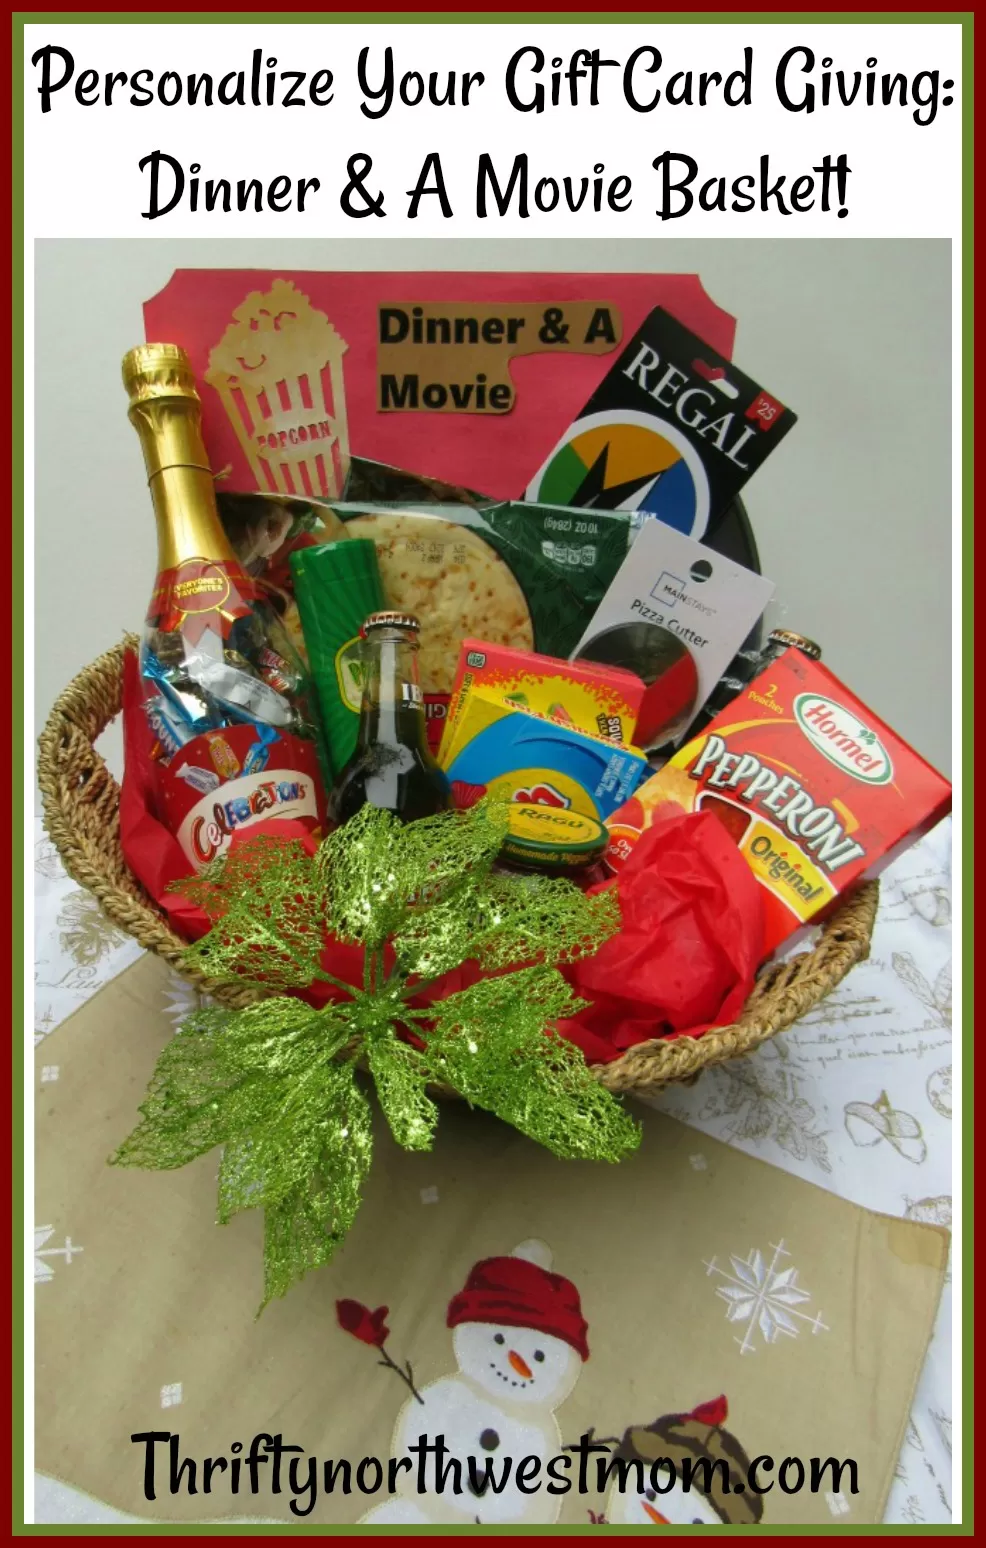 Personalize your Gift Card Giving with this creative dinner & a movie basket for a Christmas gift for a family, couple, teacher, teens and more. 